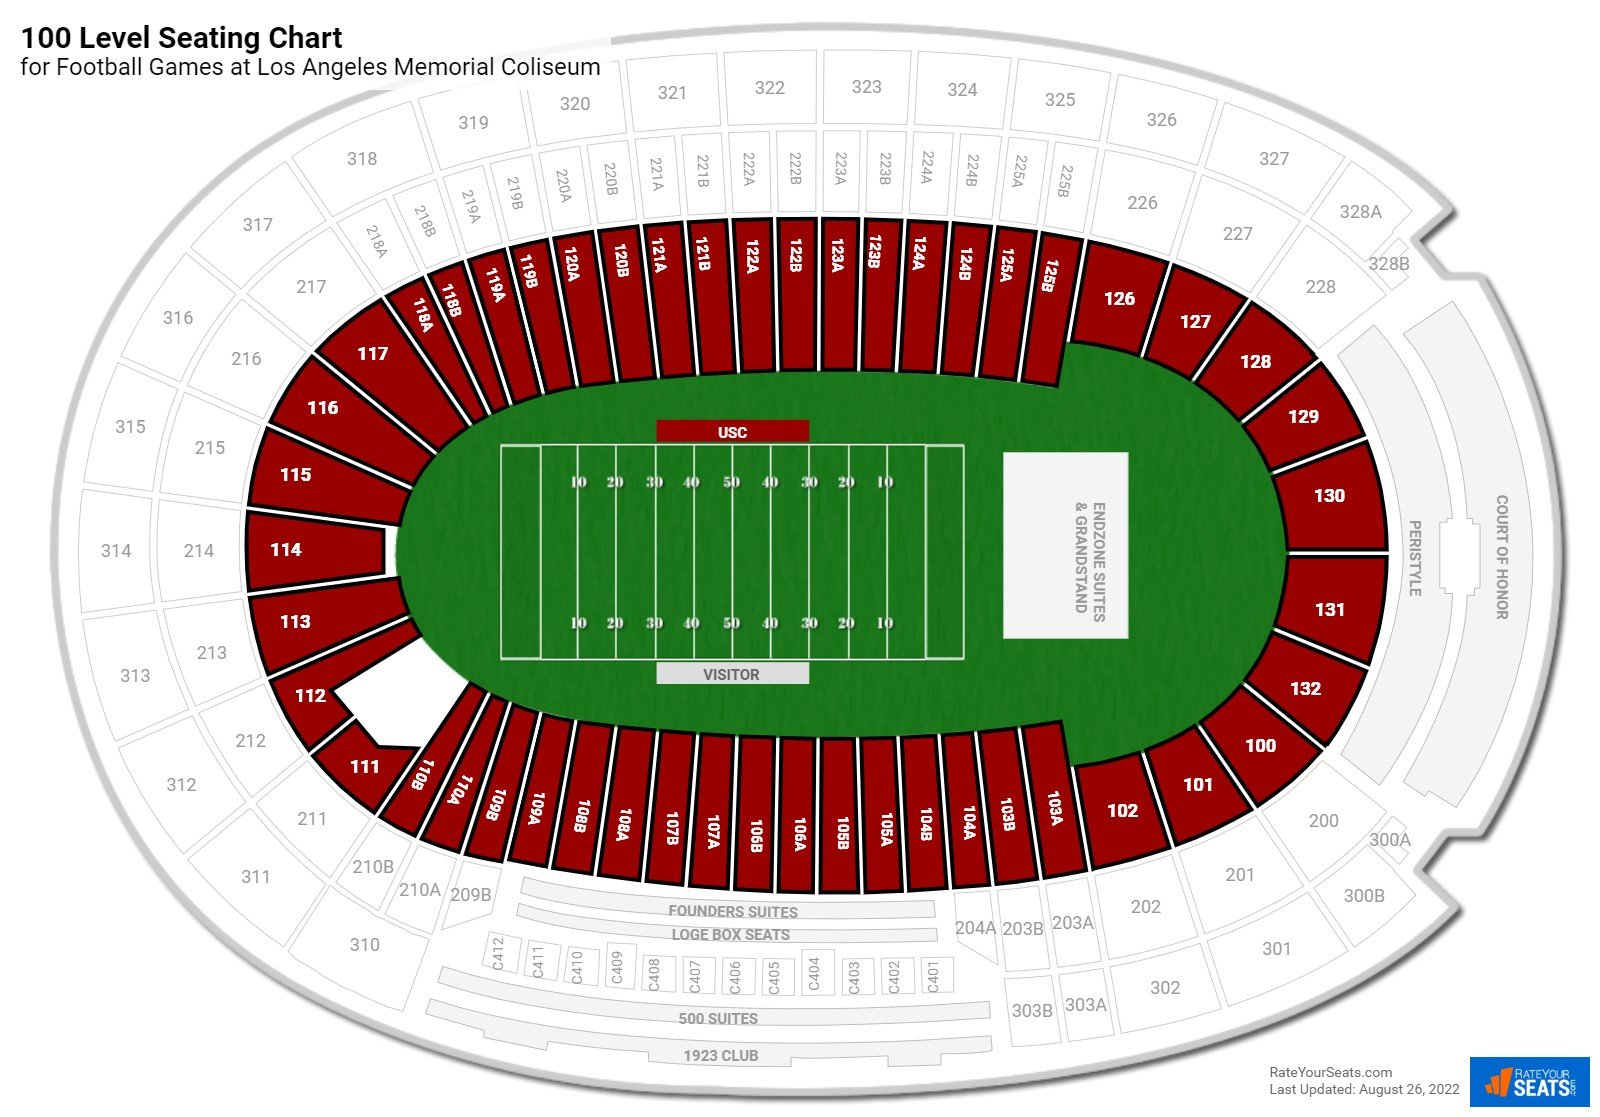 Football 100 Level Seating Chart at Los Angeles Memorial Coliseum